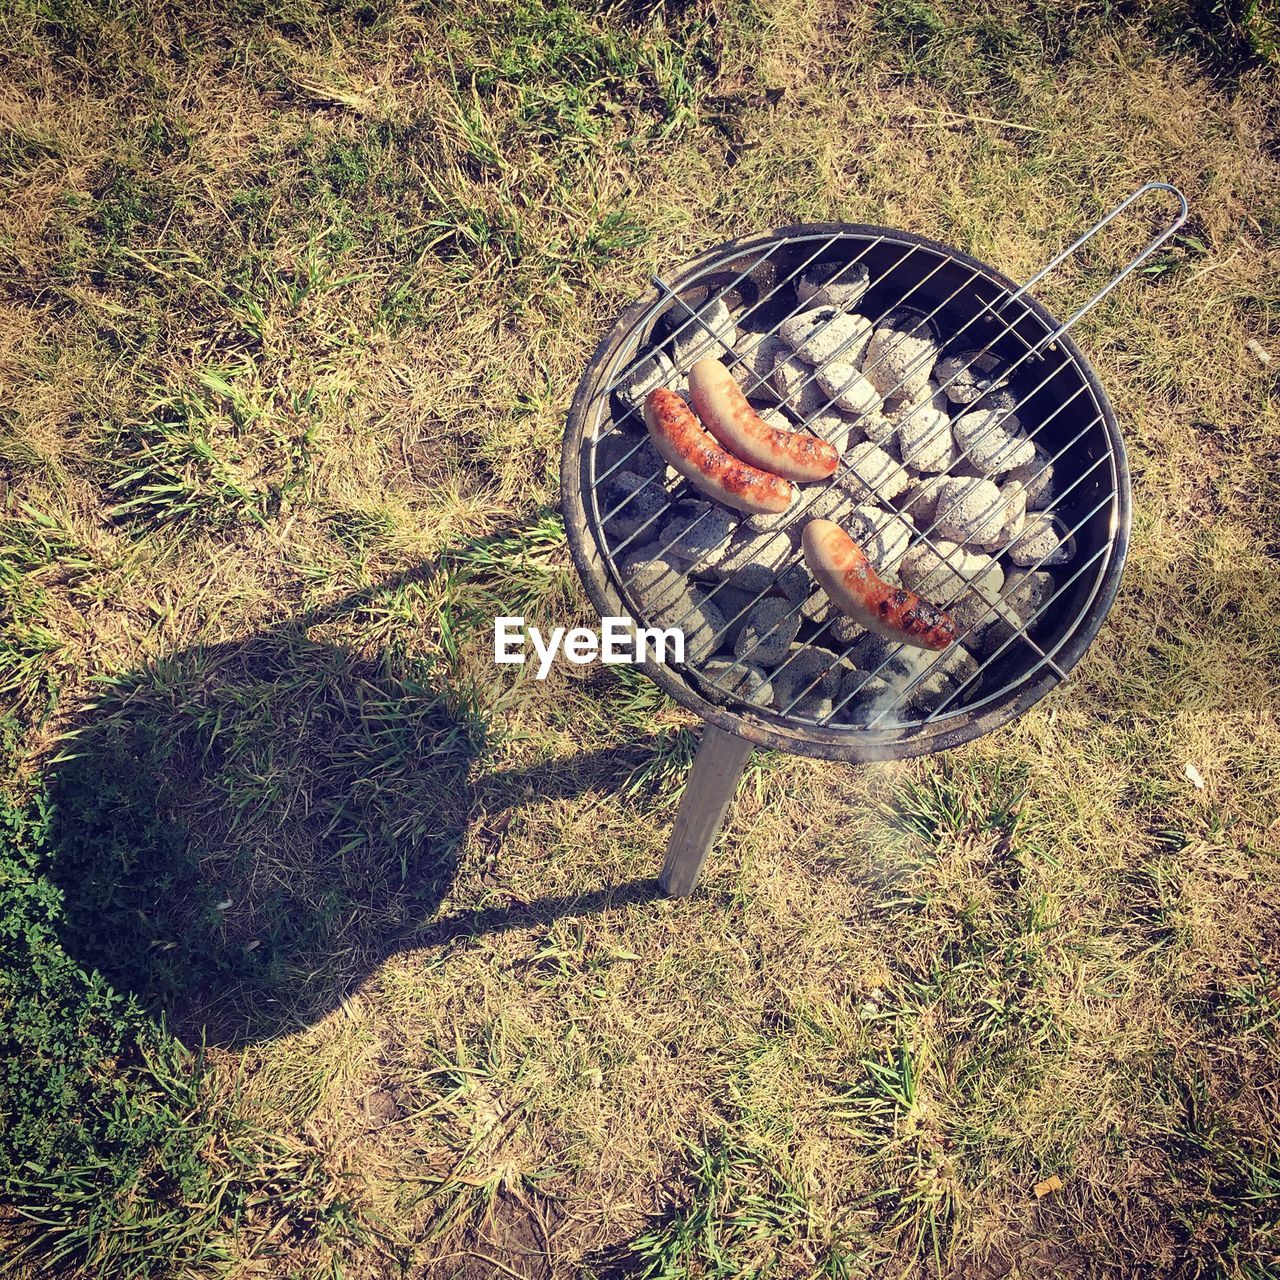 HIGH ANGLE VIEW OF BARBECUE GRILL